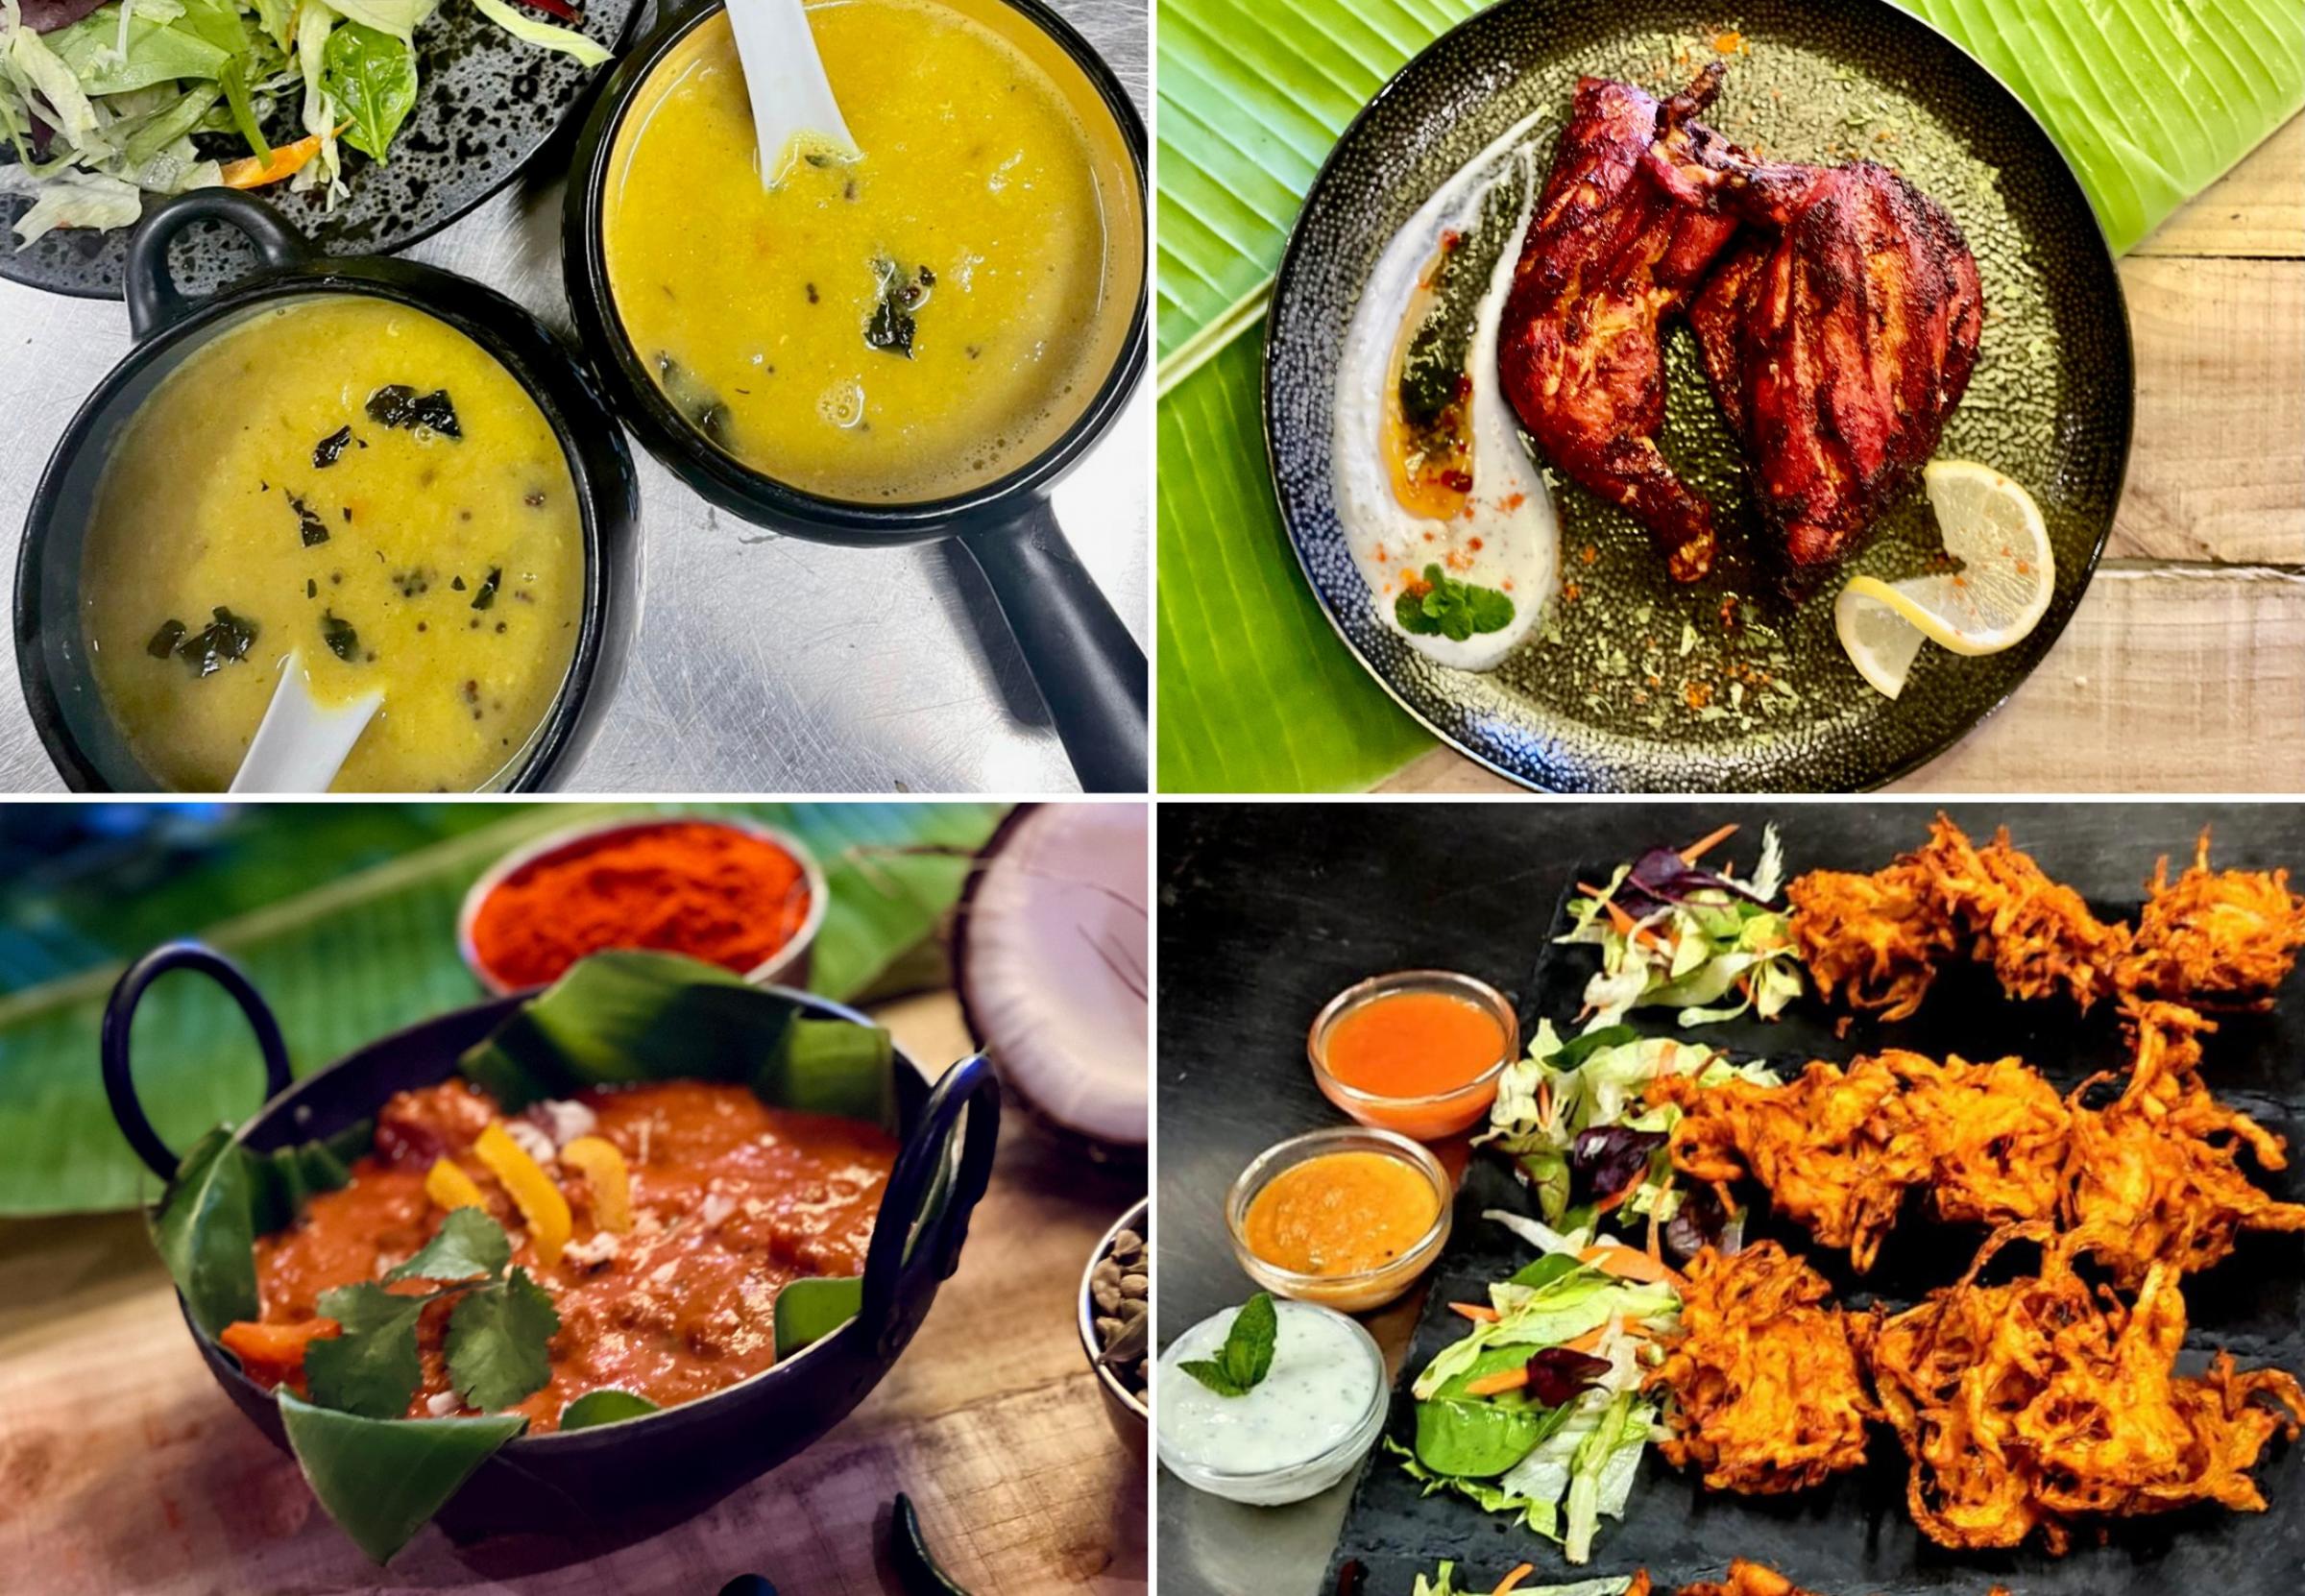 Some of the tasty dishes on the menu at Kerala Kitchen